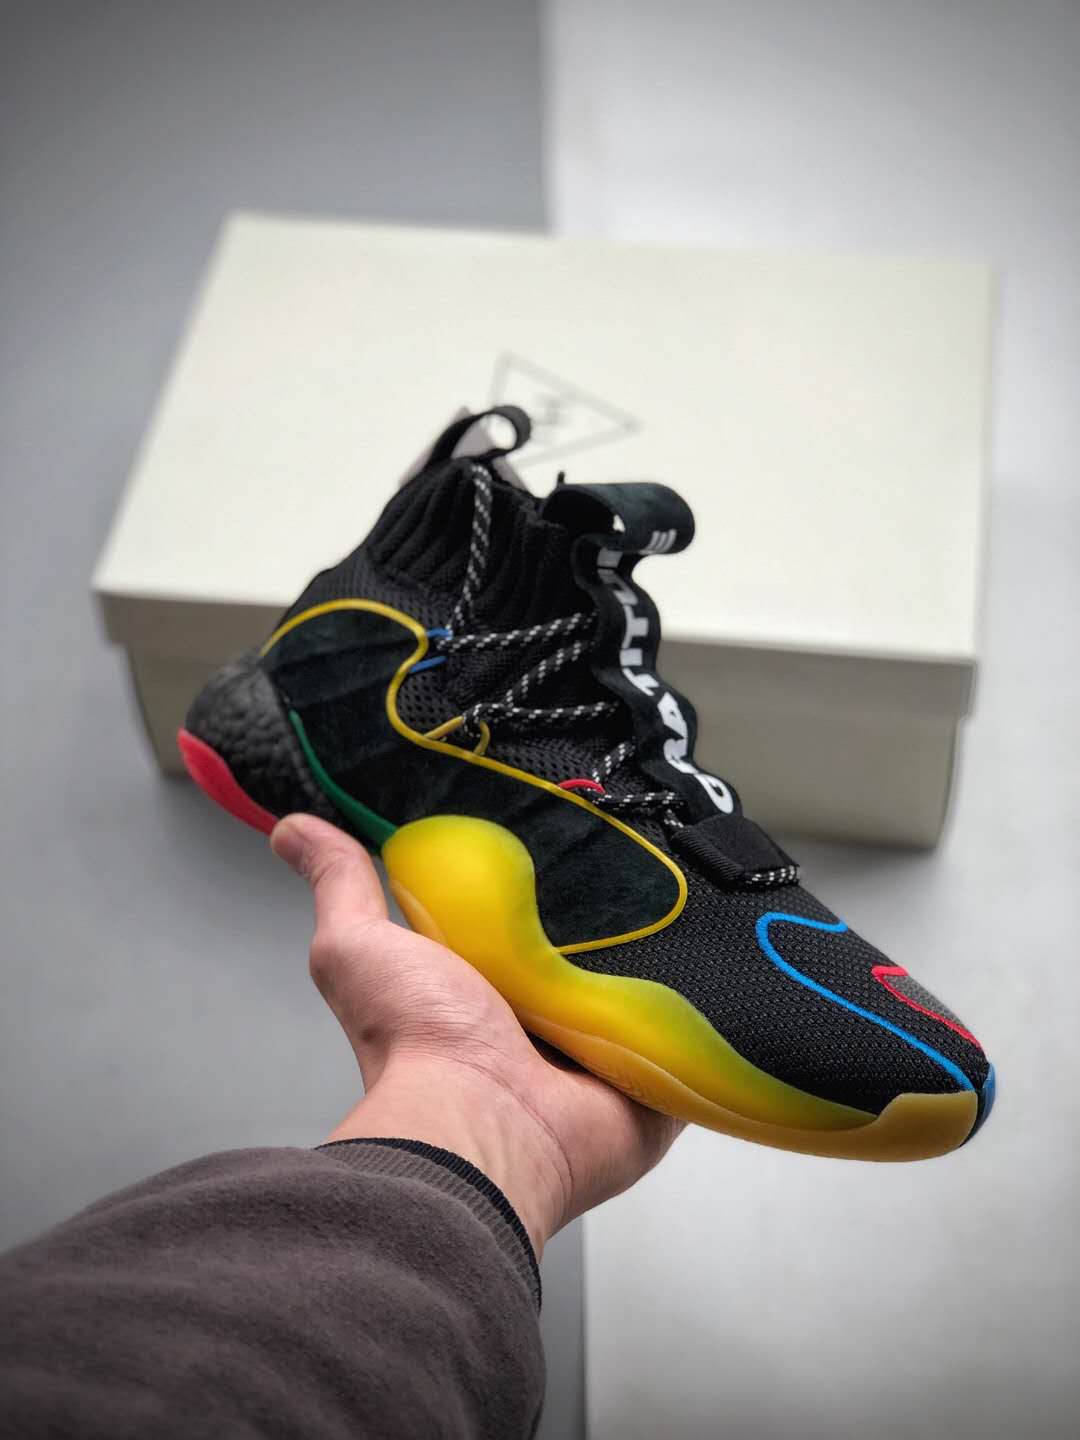 Adidas Pharrell x Crazy BYW X 'Gratitude Empathy' G27805: The Perfect Blend of Style and Comfort